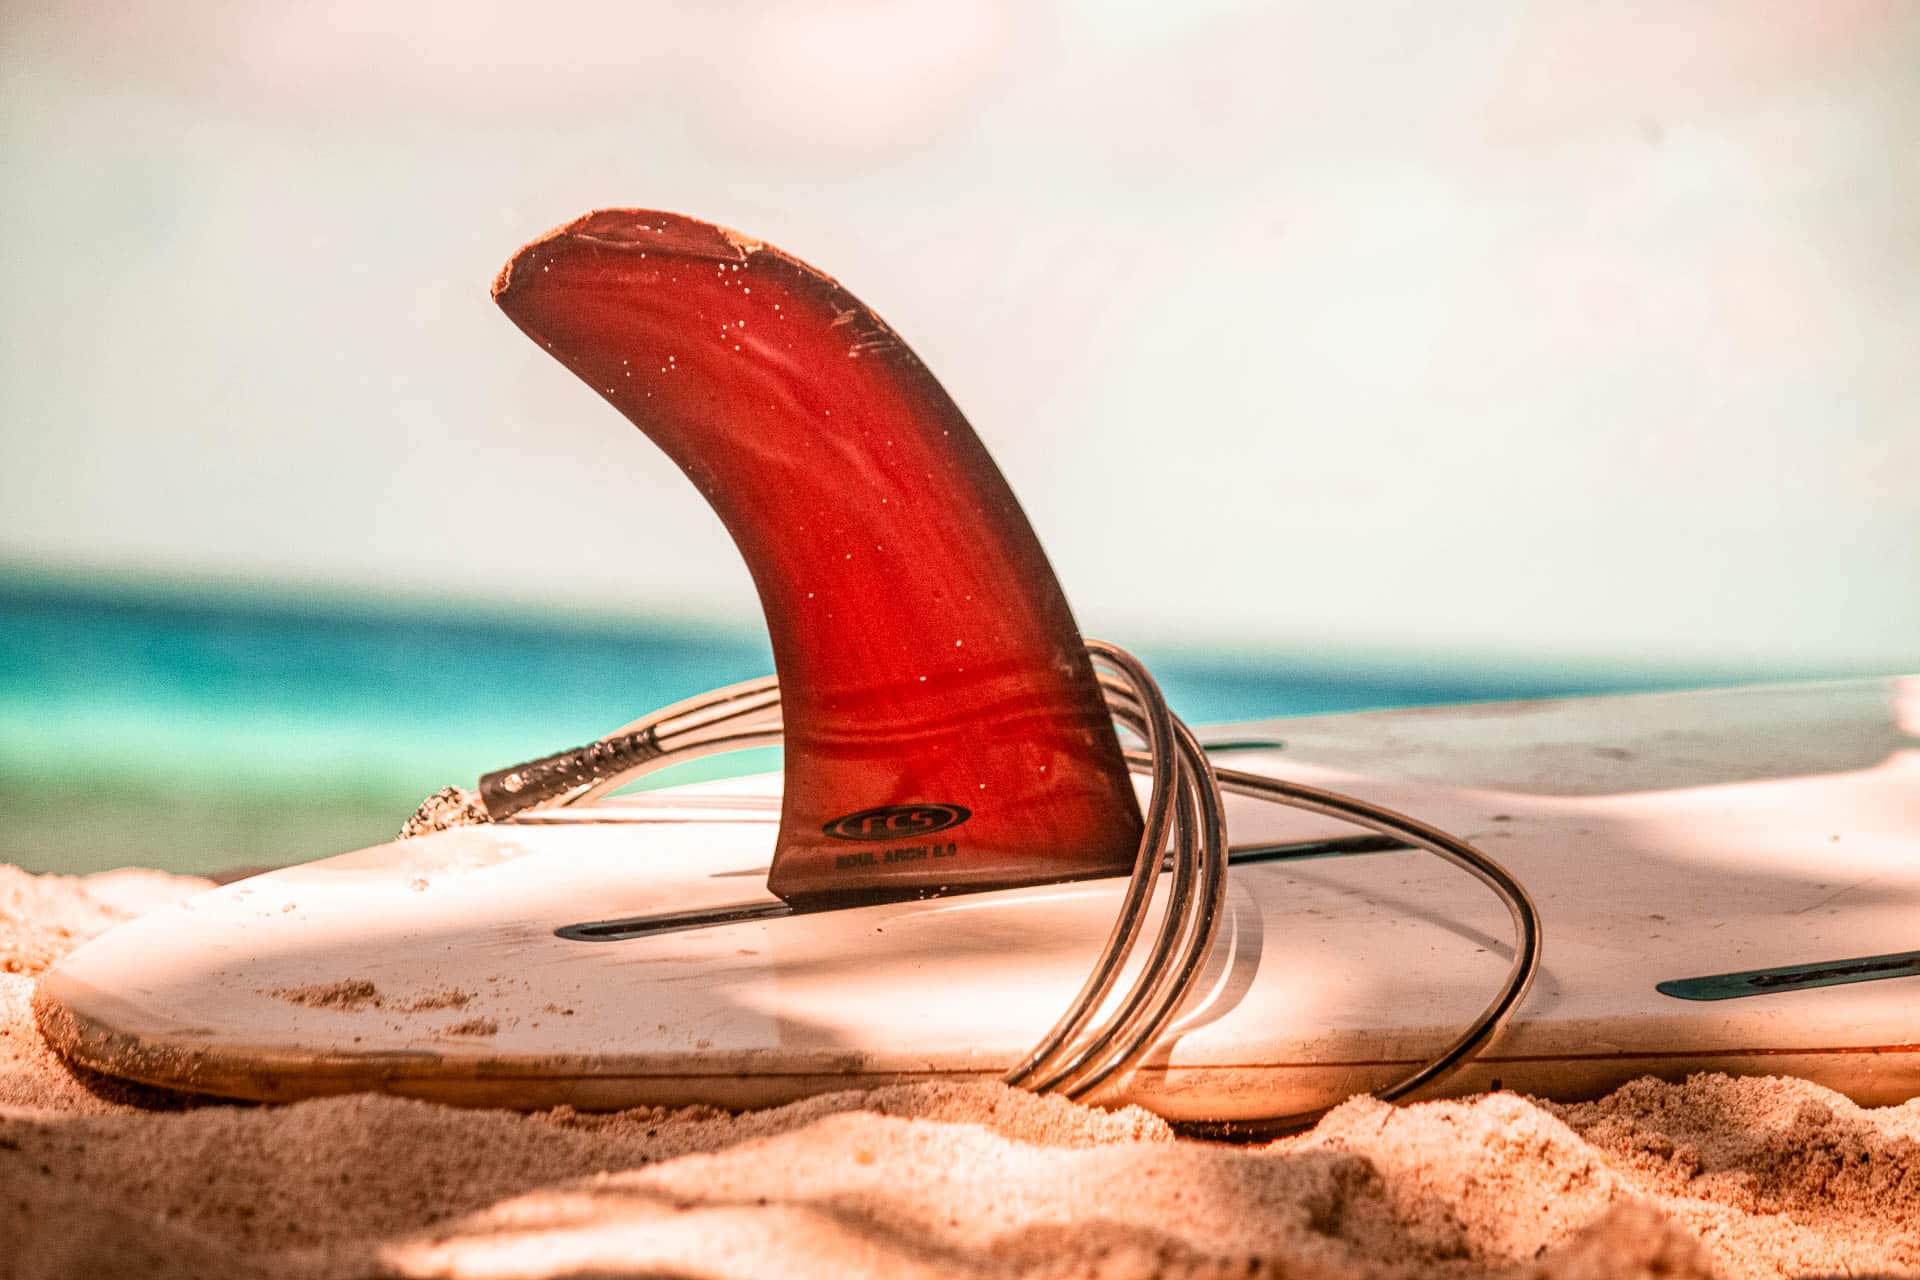 Closeup of a Surfboard with Red Fin on the Beach